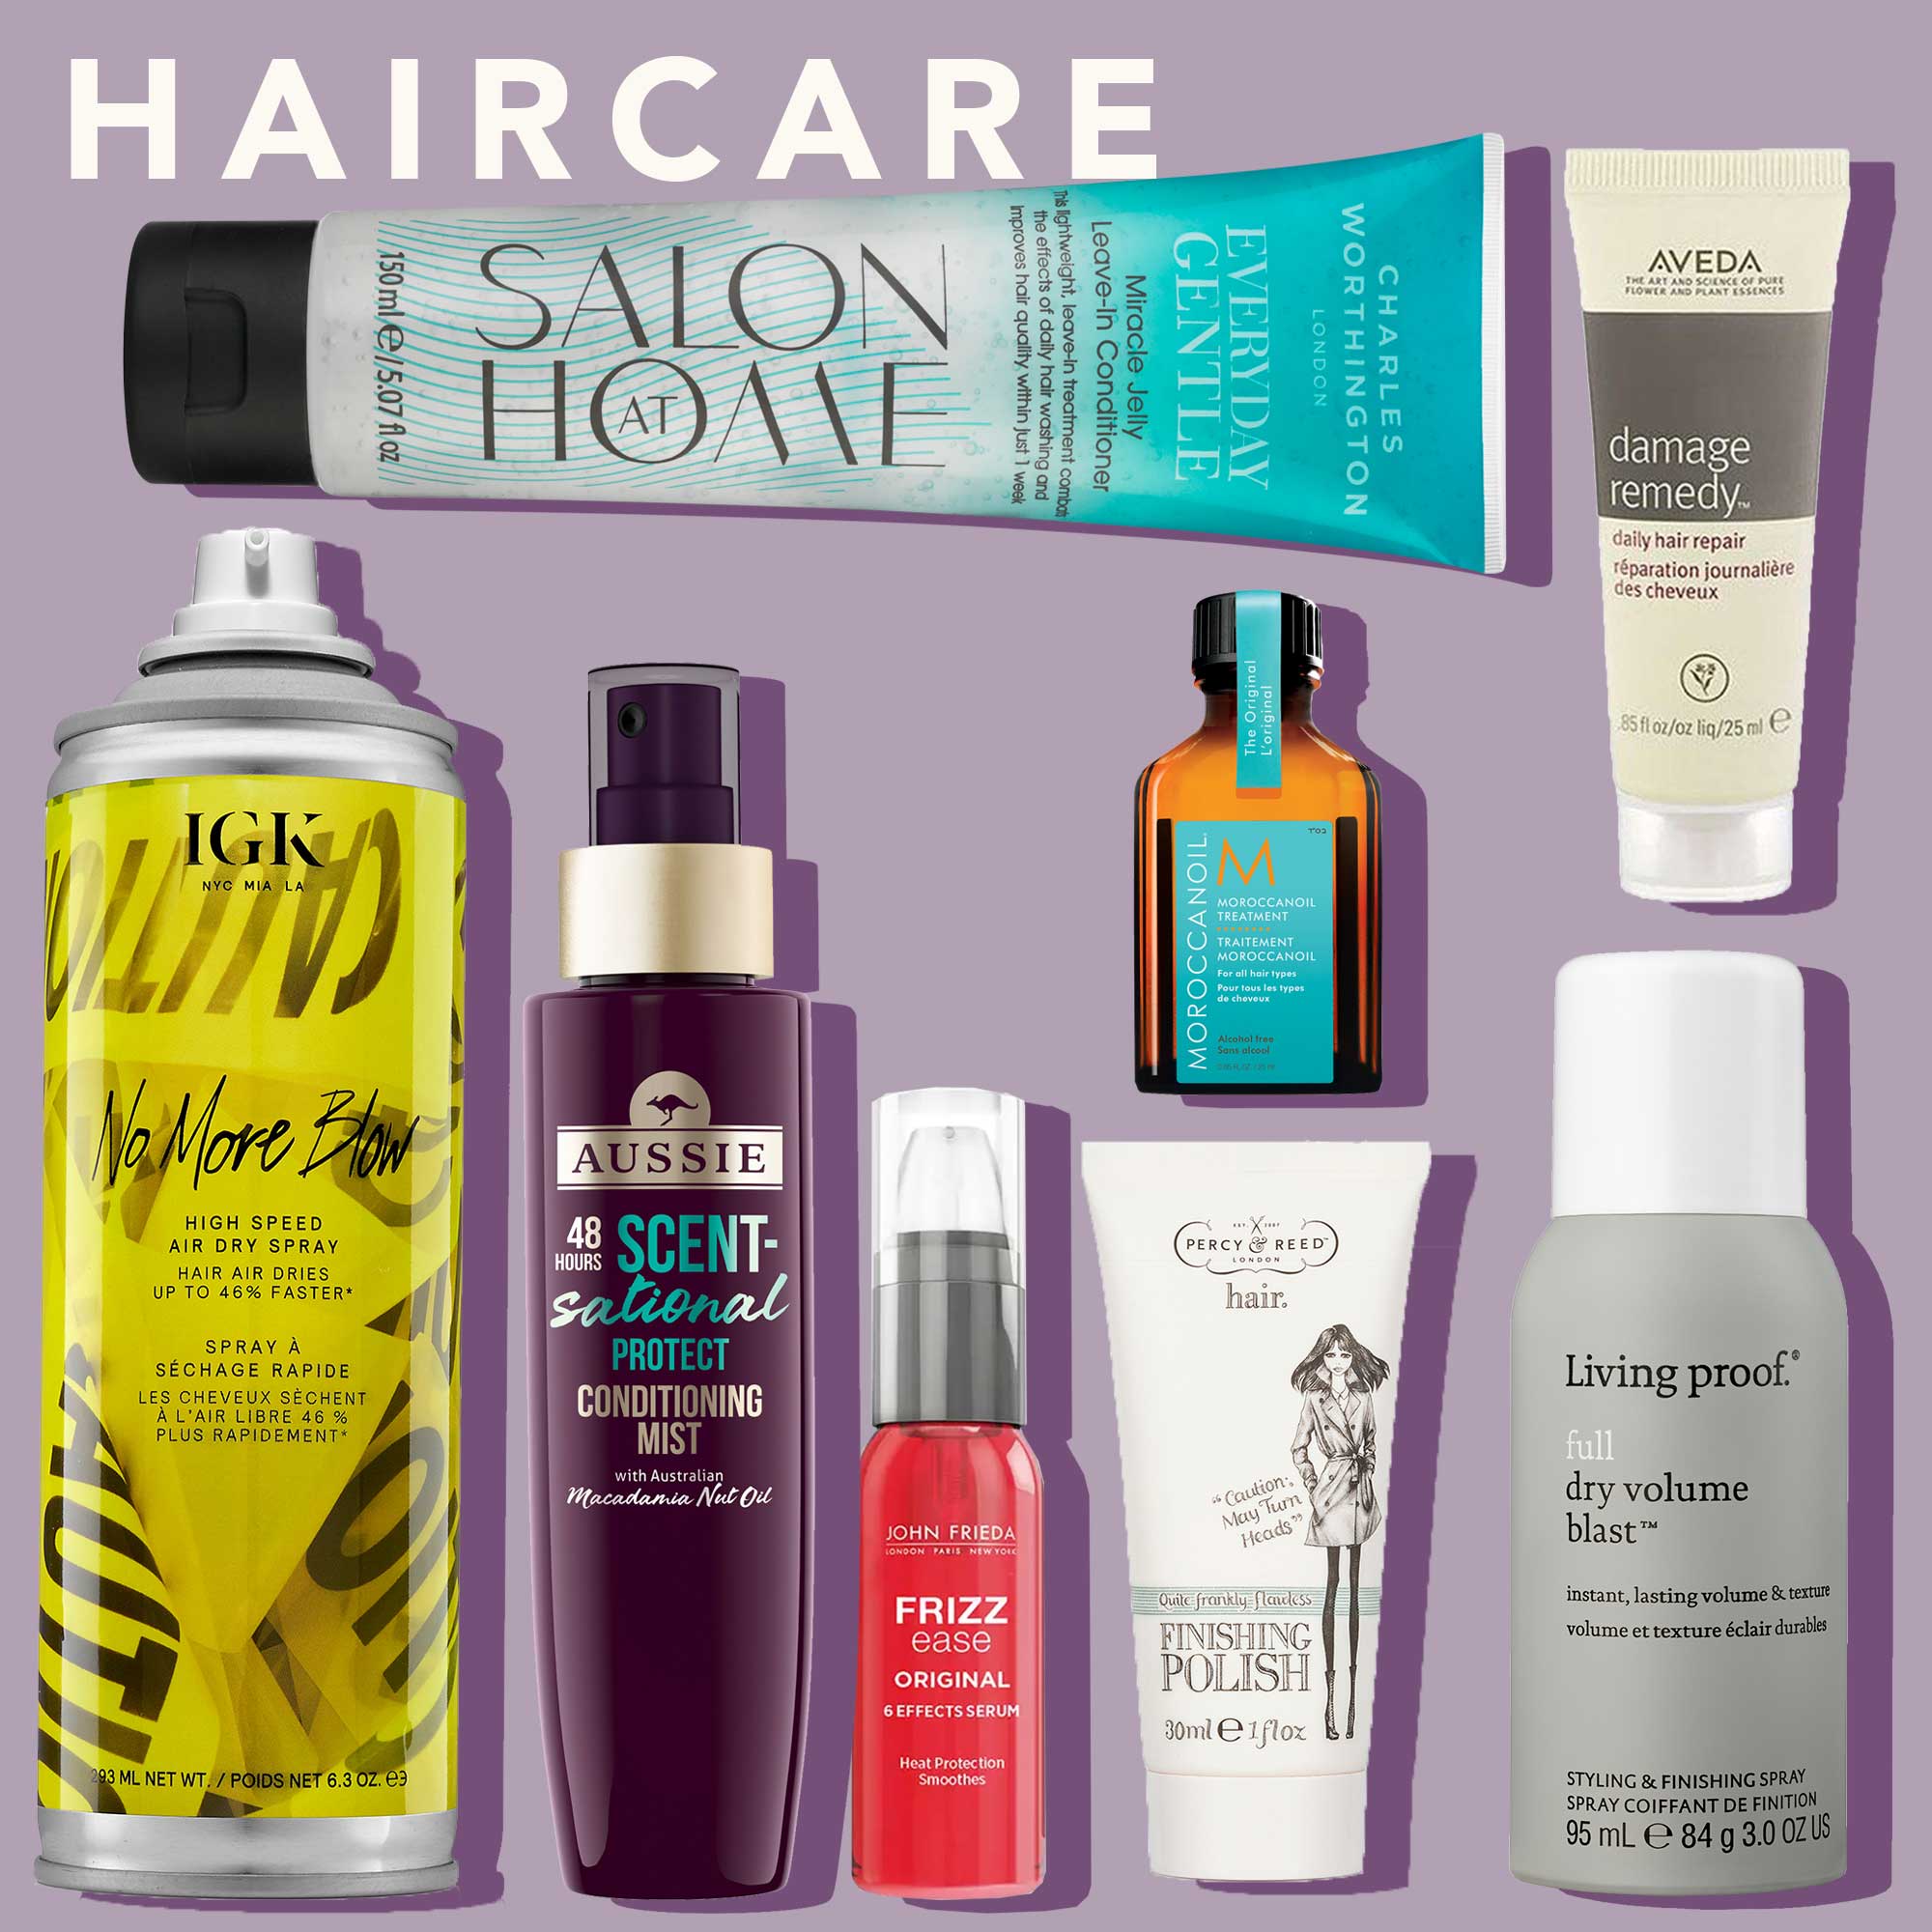 STS-CATEGORIES-FLATLAYS-HAIR